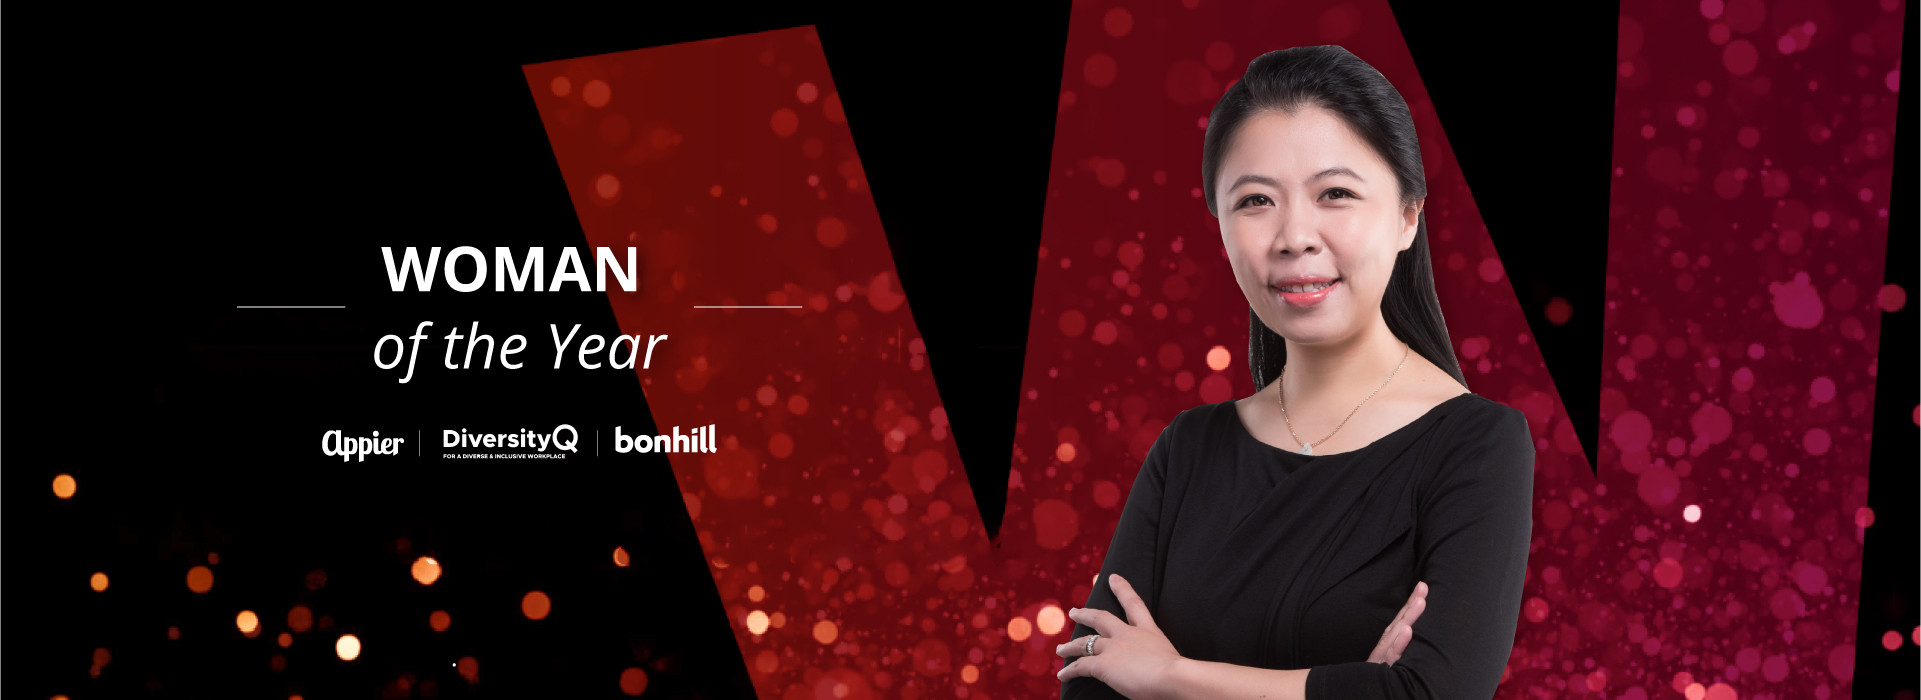 Appier COO Winnie Lee named "Woman of the Year" at the Women in IT Asia Awards 2022